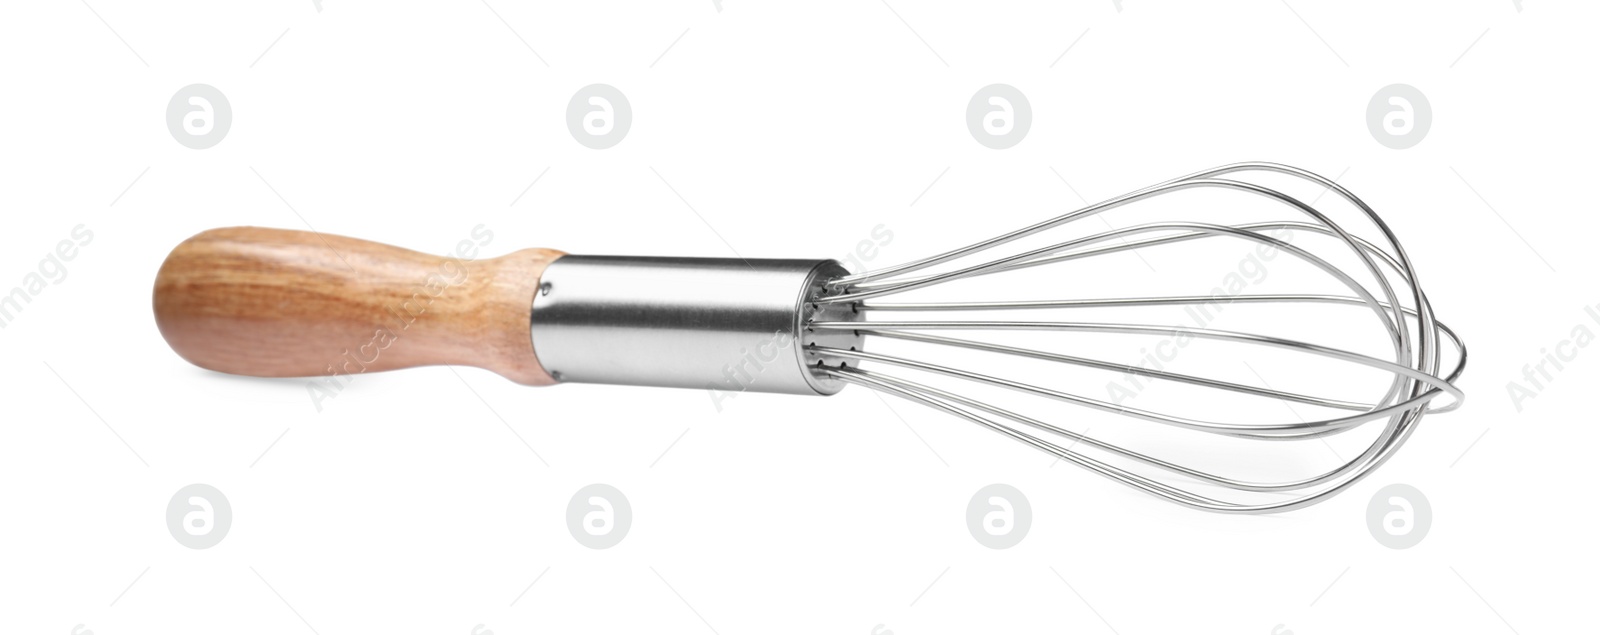 Photo of New balloon whisk with wooden handle isolated on white